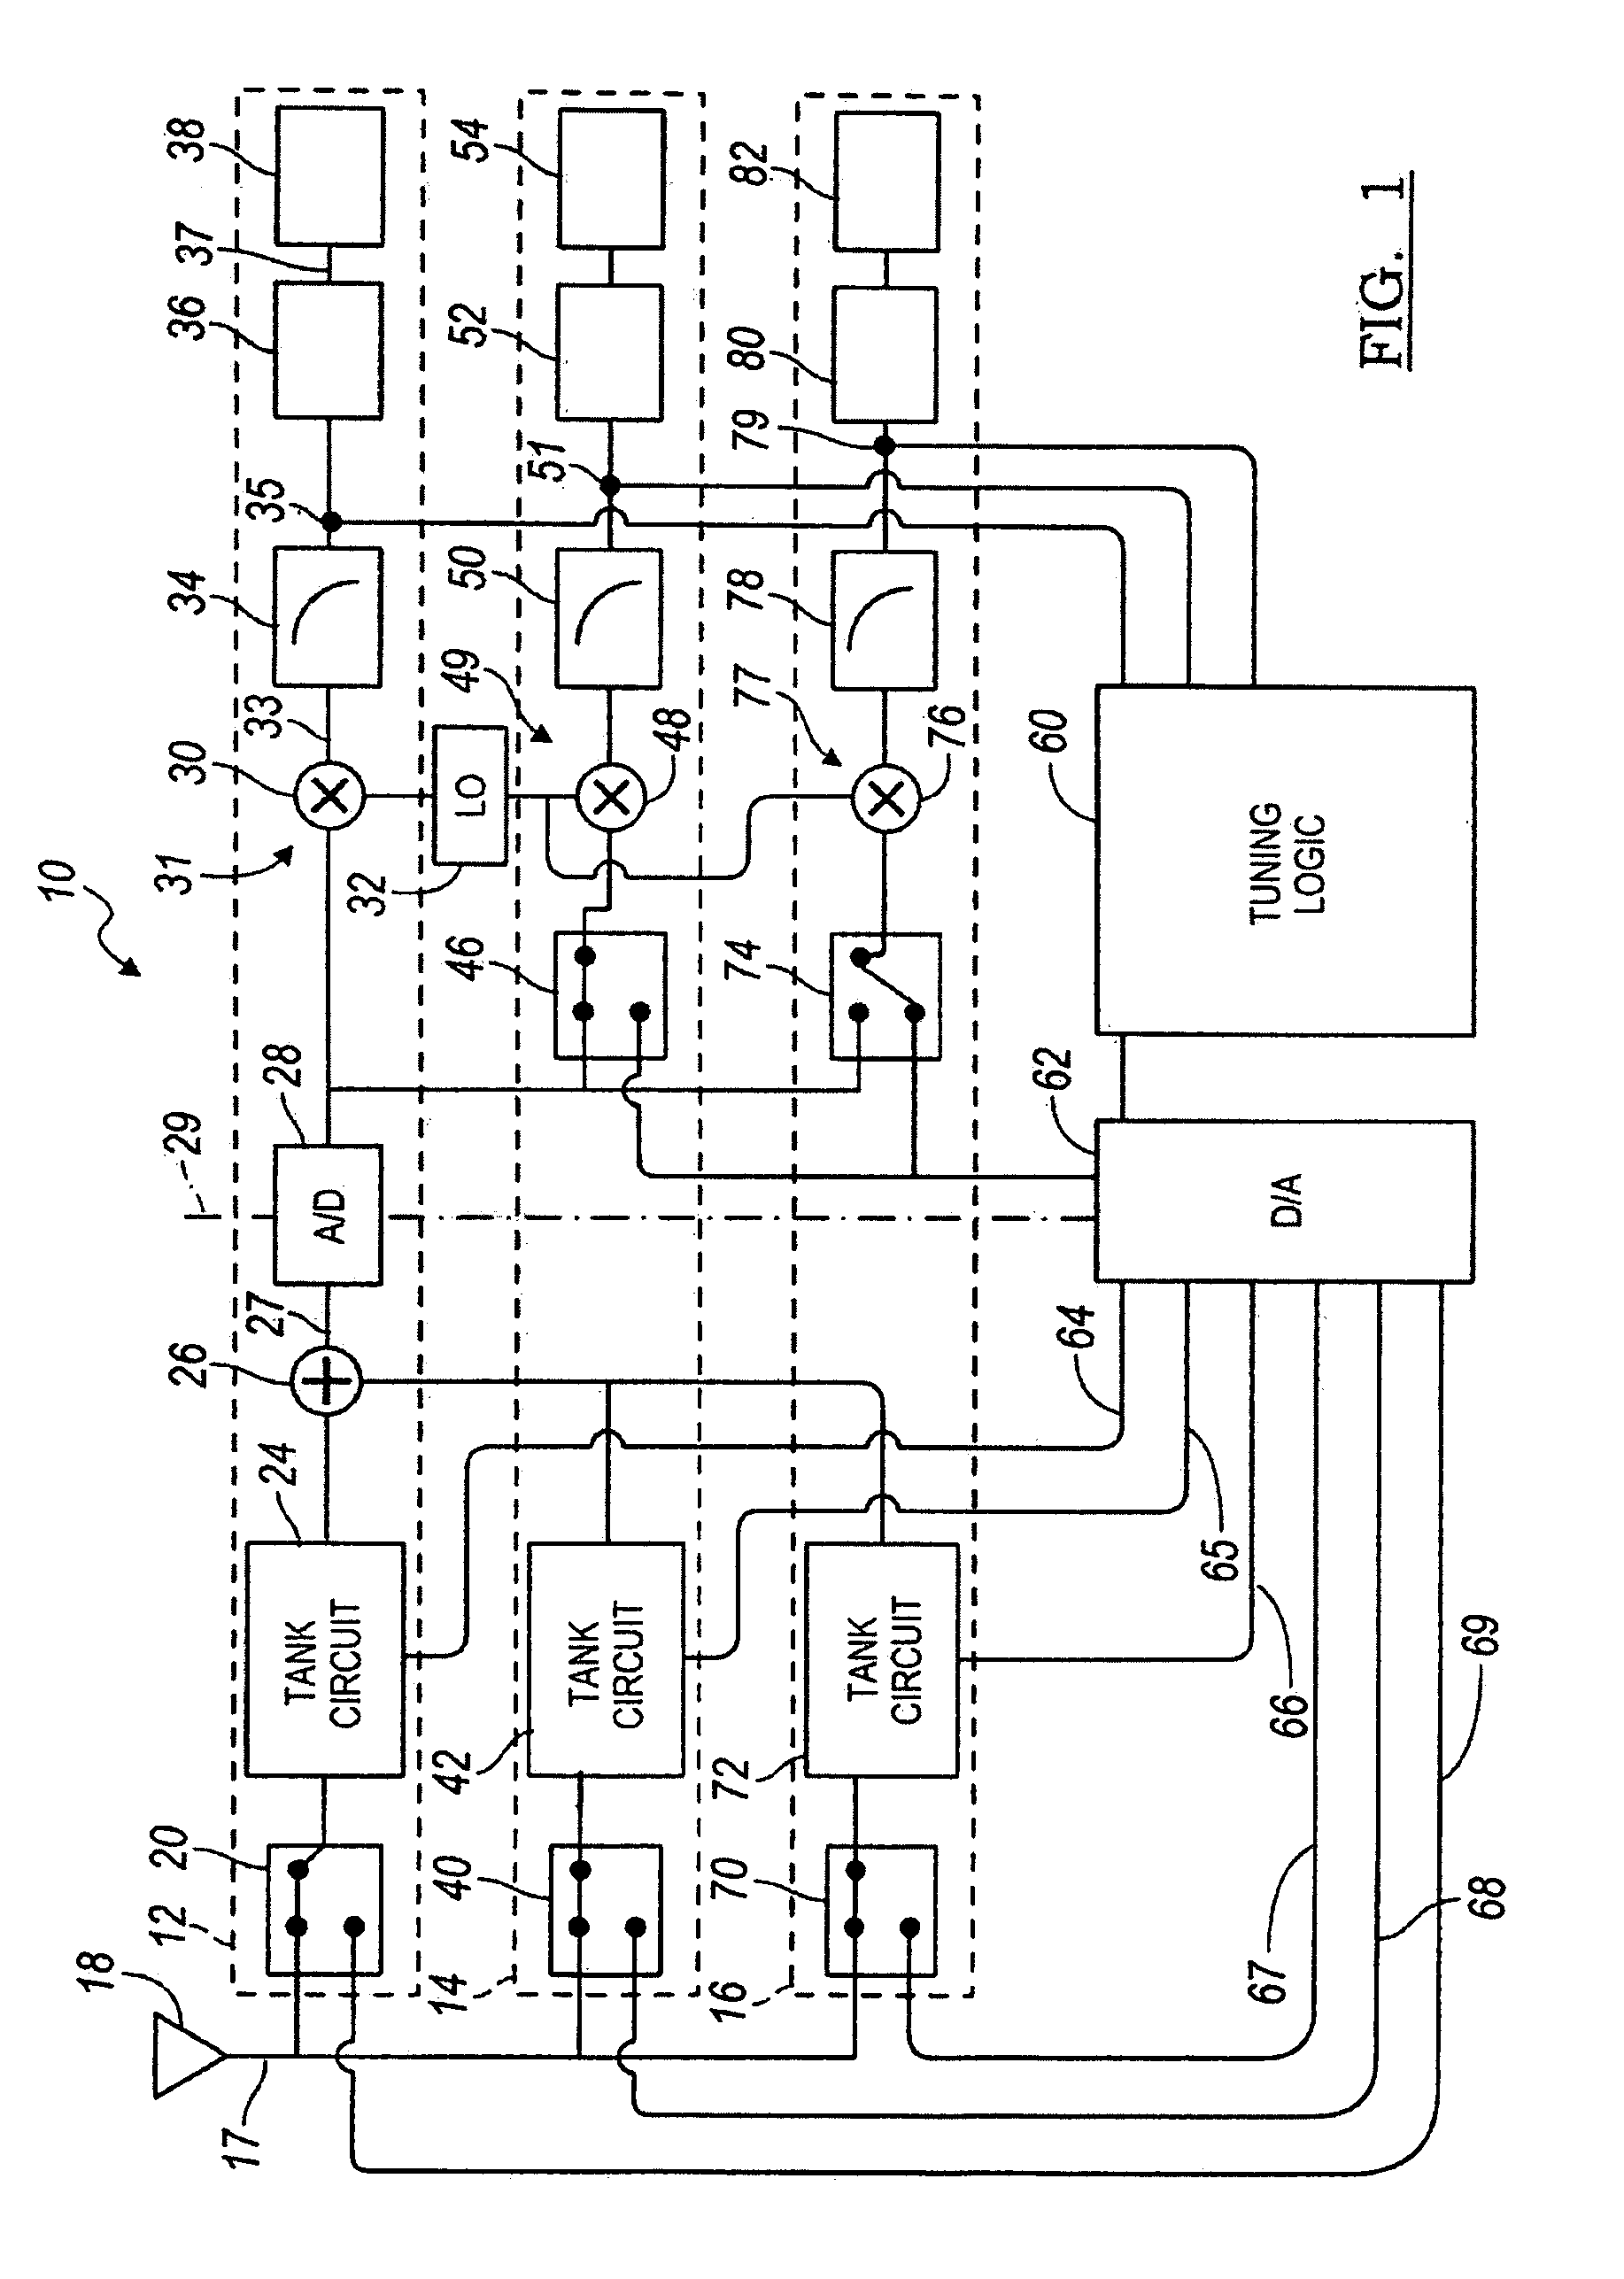 Direct conversion receiving architecture with an integrated tuner self alignment function